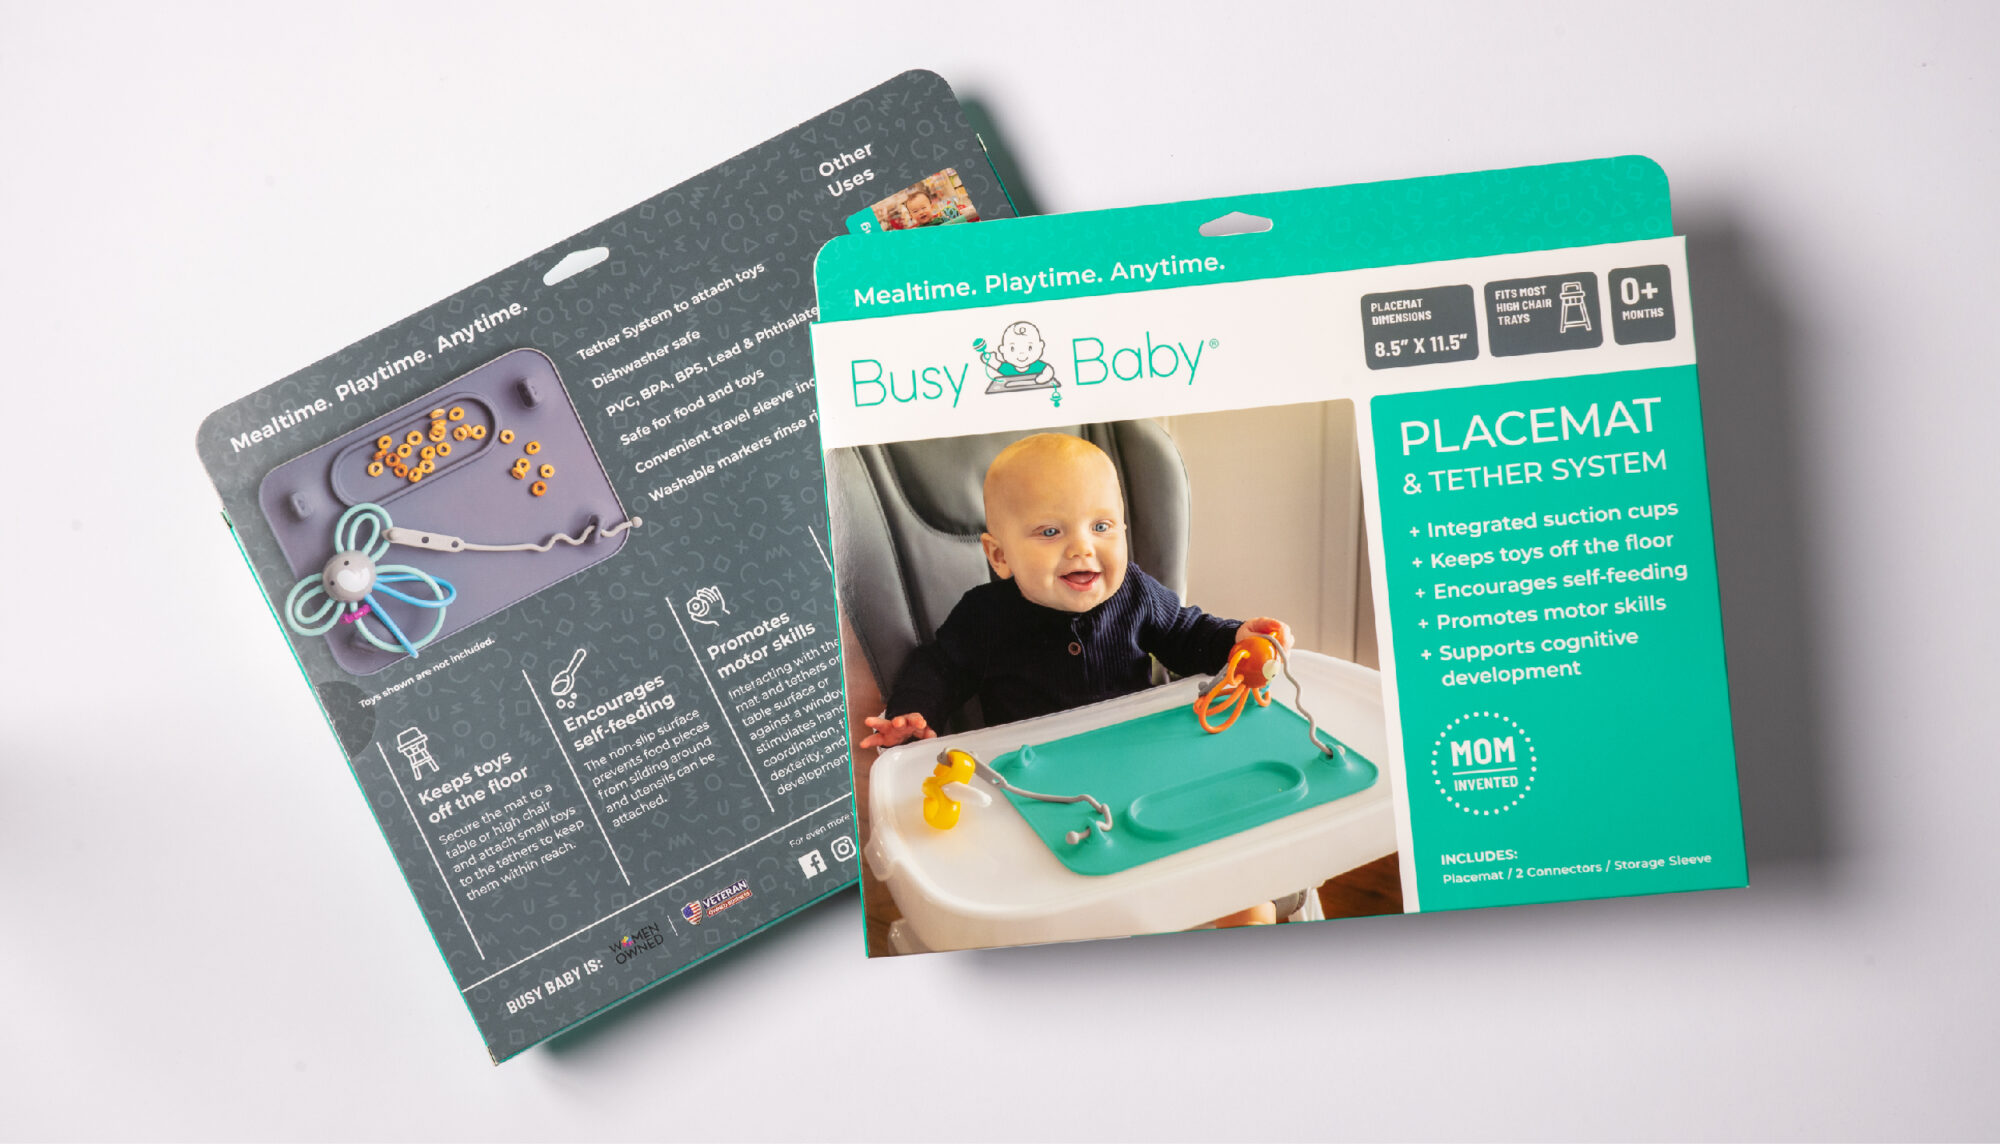 busybaby_package_bib